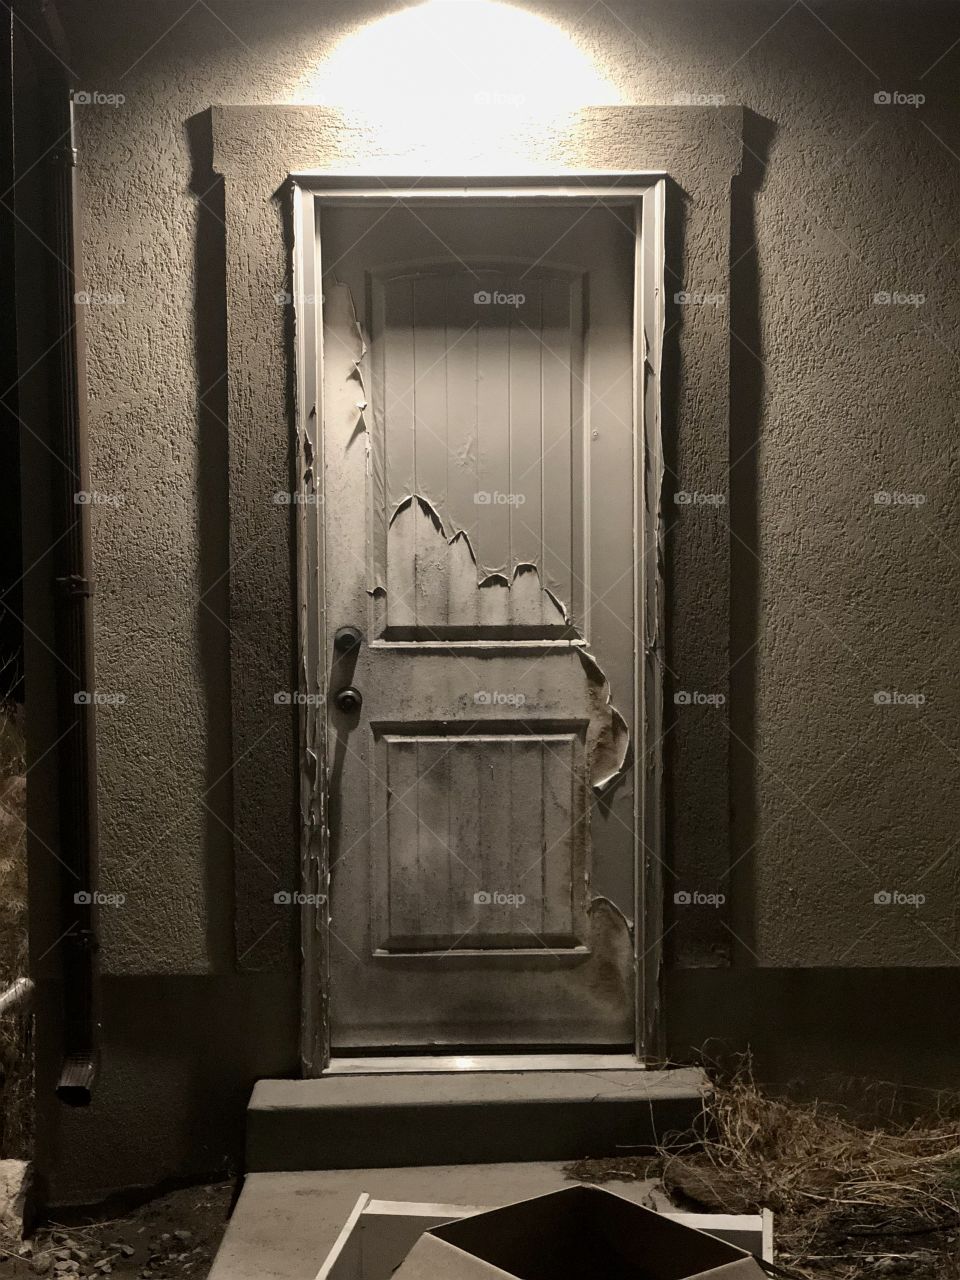 A 12-year-old, old weathered down door. An eerie combination of destruction and overhead lighting just after sunset.